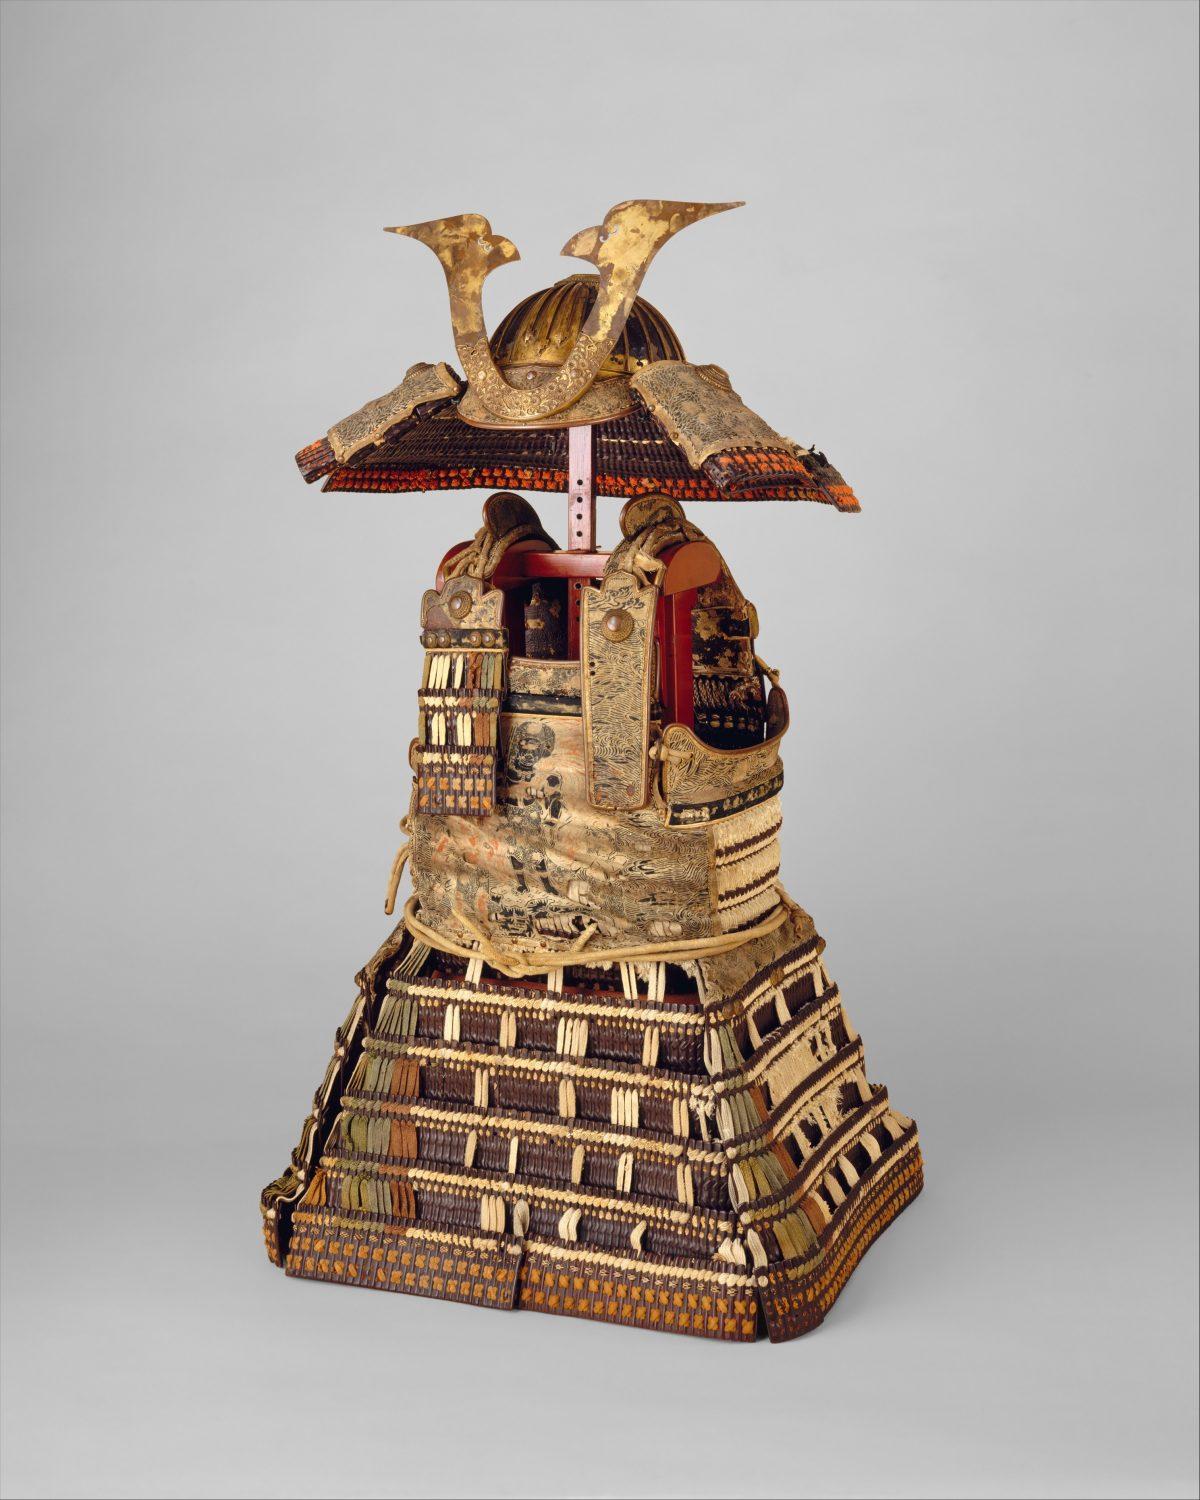 Armor (yoroi) of Ashikaga Takauji, late Kamakura (1185–1333) to Nanbokucho period (1336–92), early to mid–14th century. This is a rare example of a medieval “yoroi,” an early Japanese armor worn by warriors on horseback. Gift of Bashford Dean, 1914. (The Metropolitan Museum of Art)